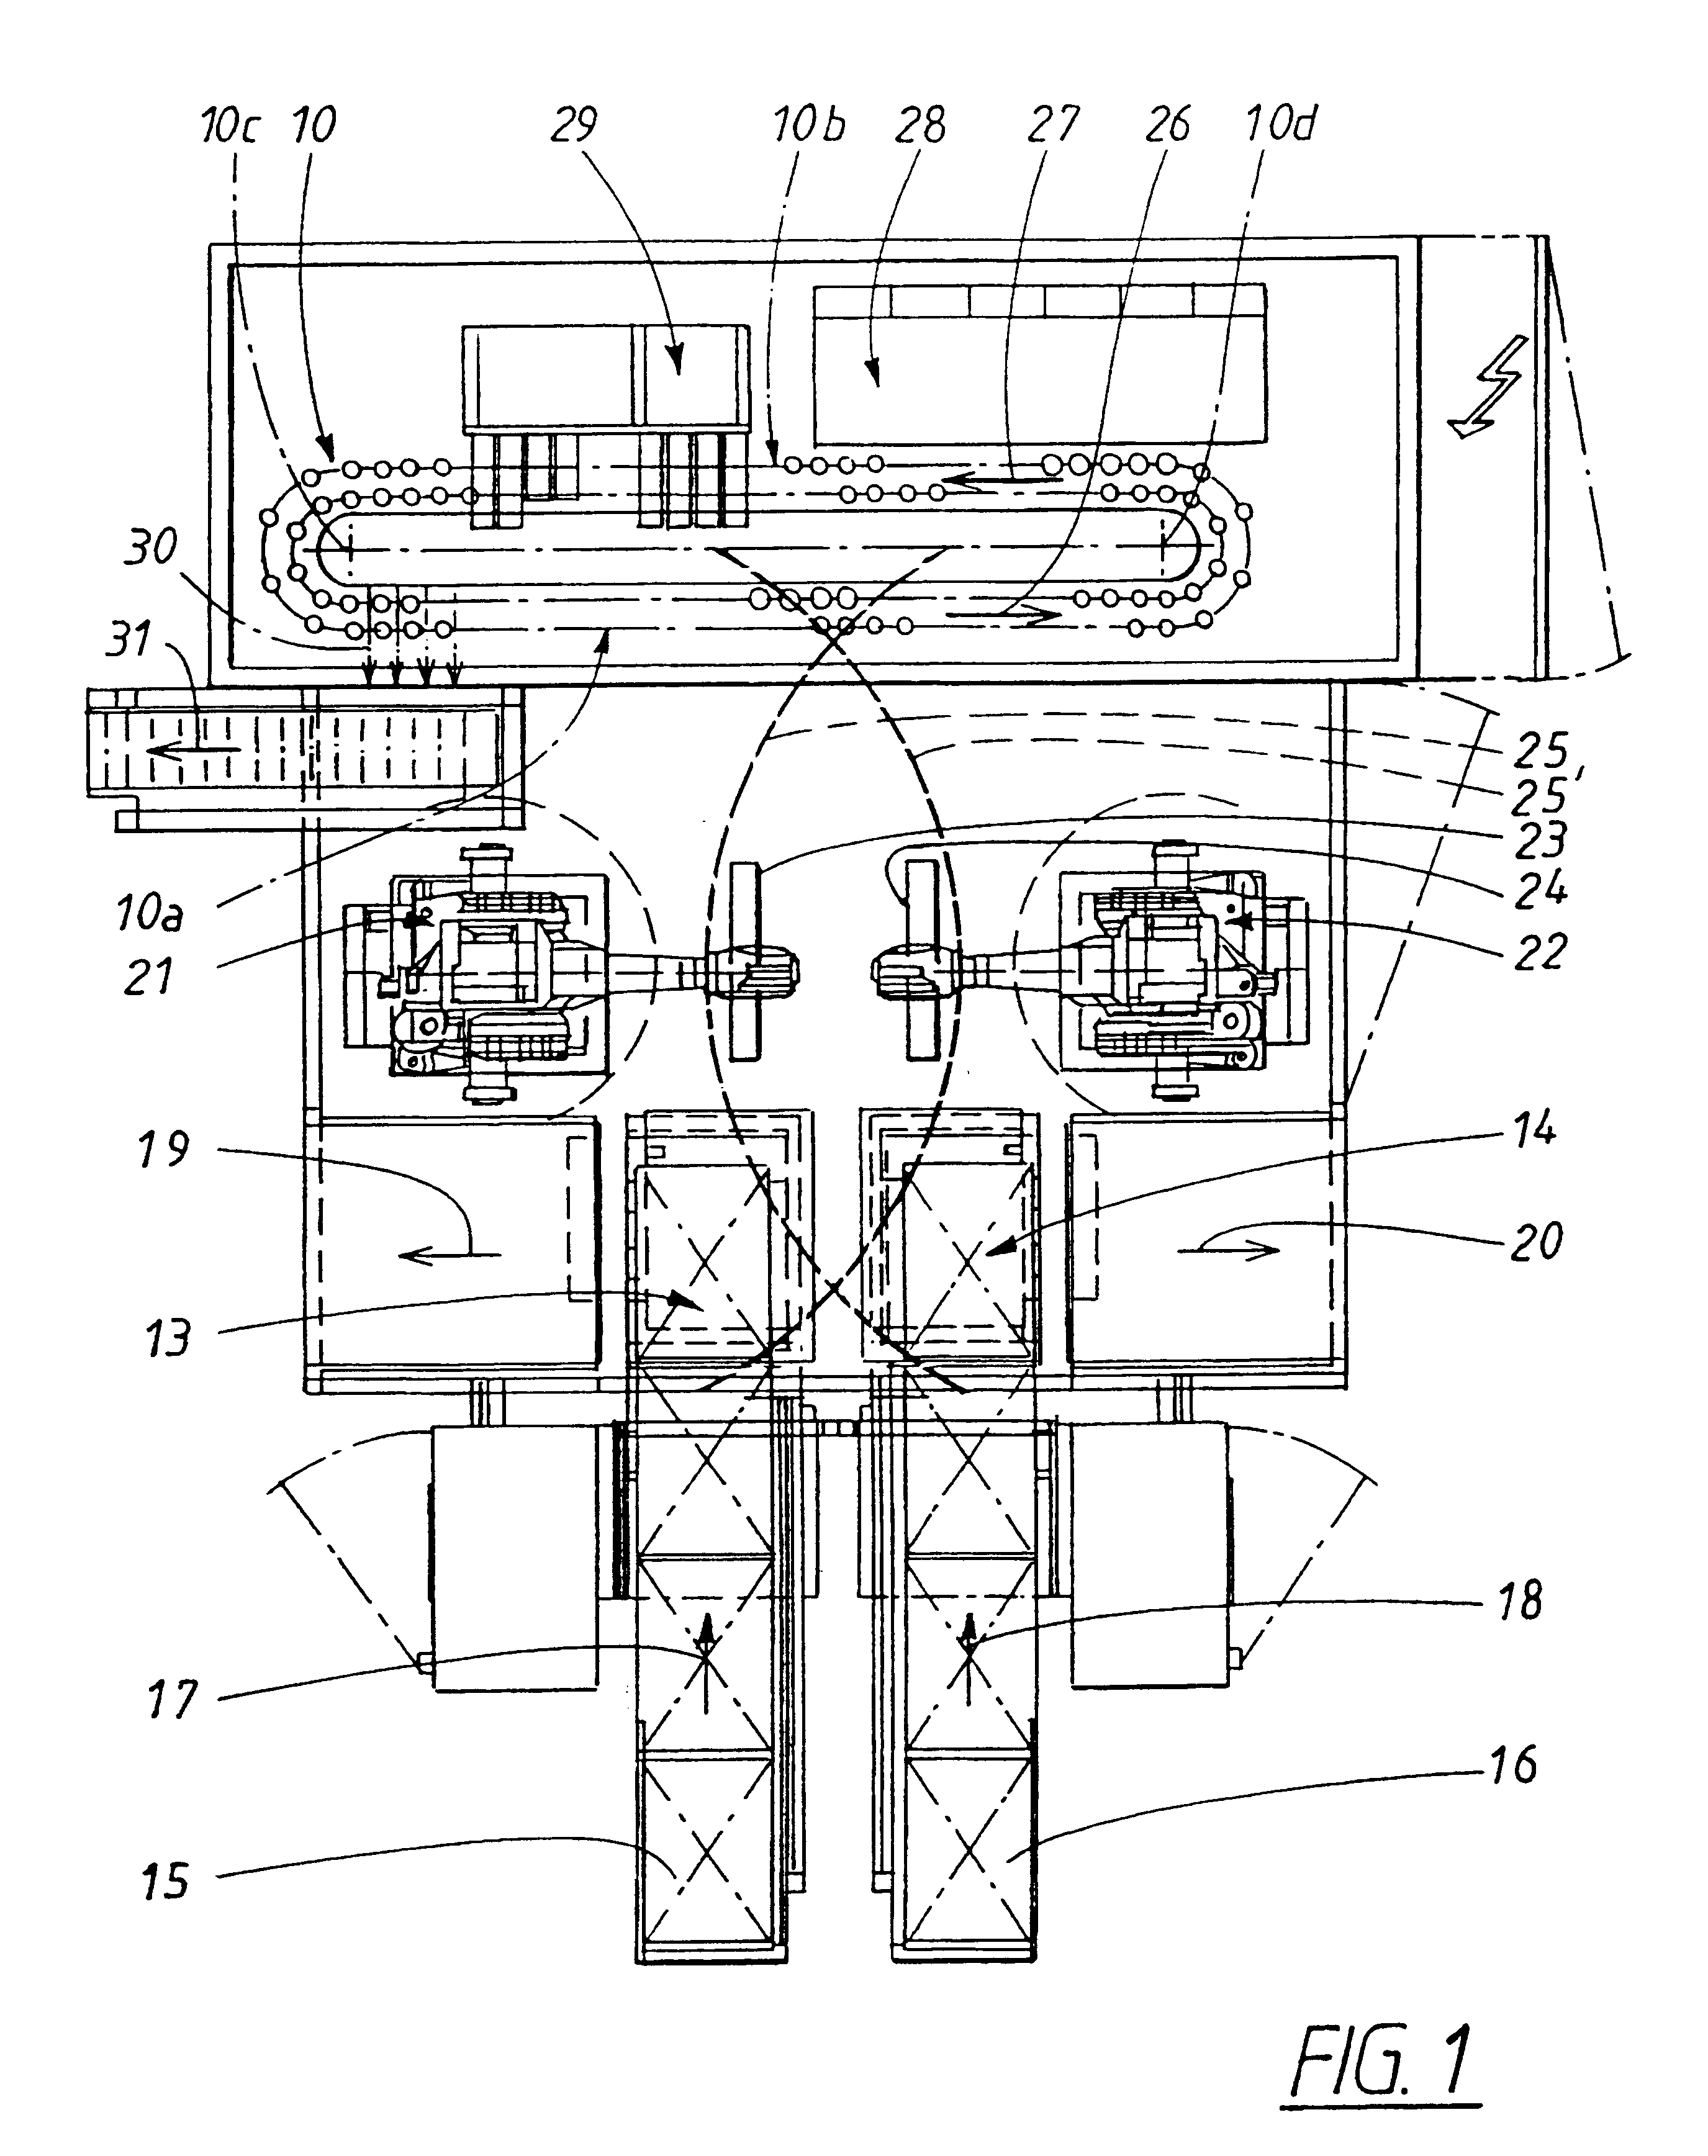 Feeder for a tube-filling machine